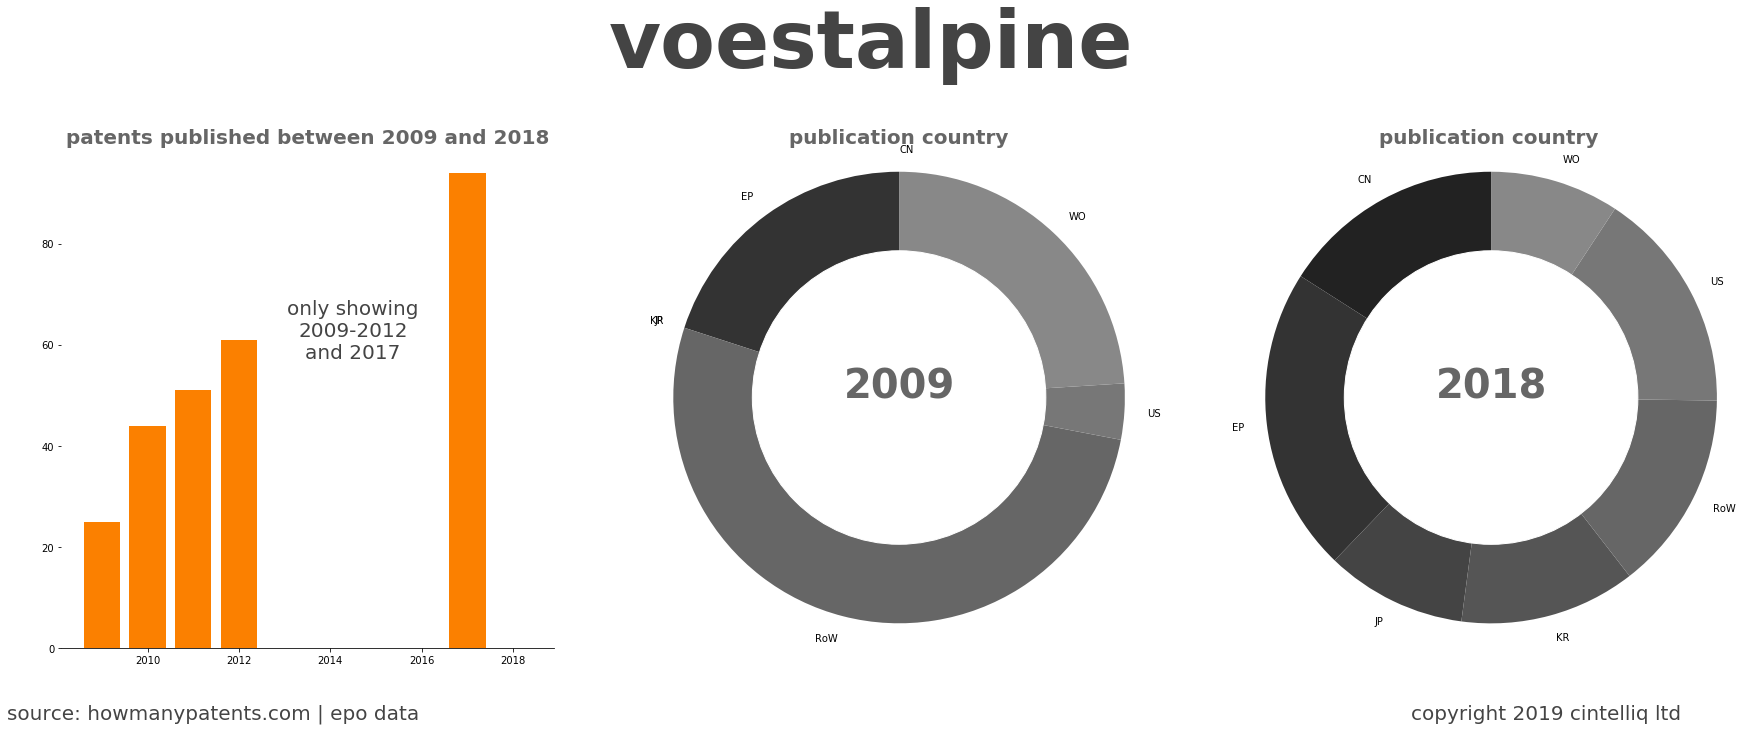 summary of patents for Voestalpine